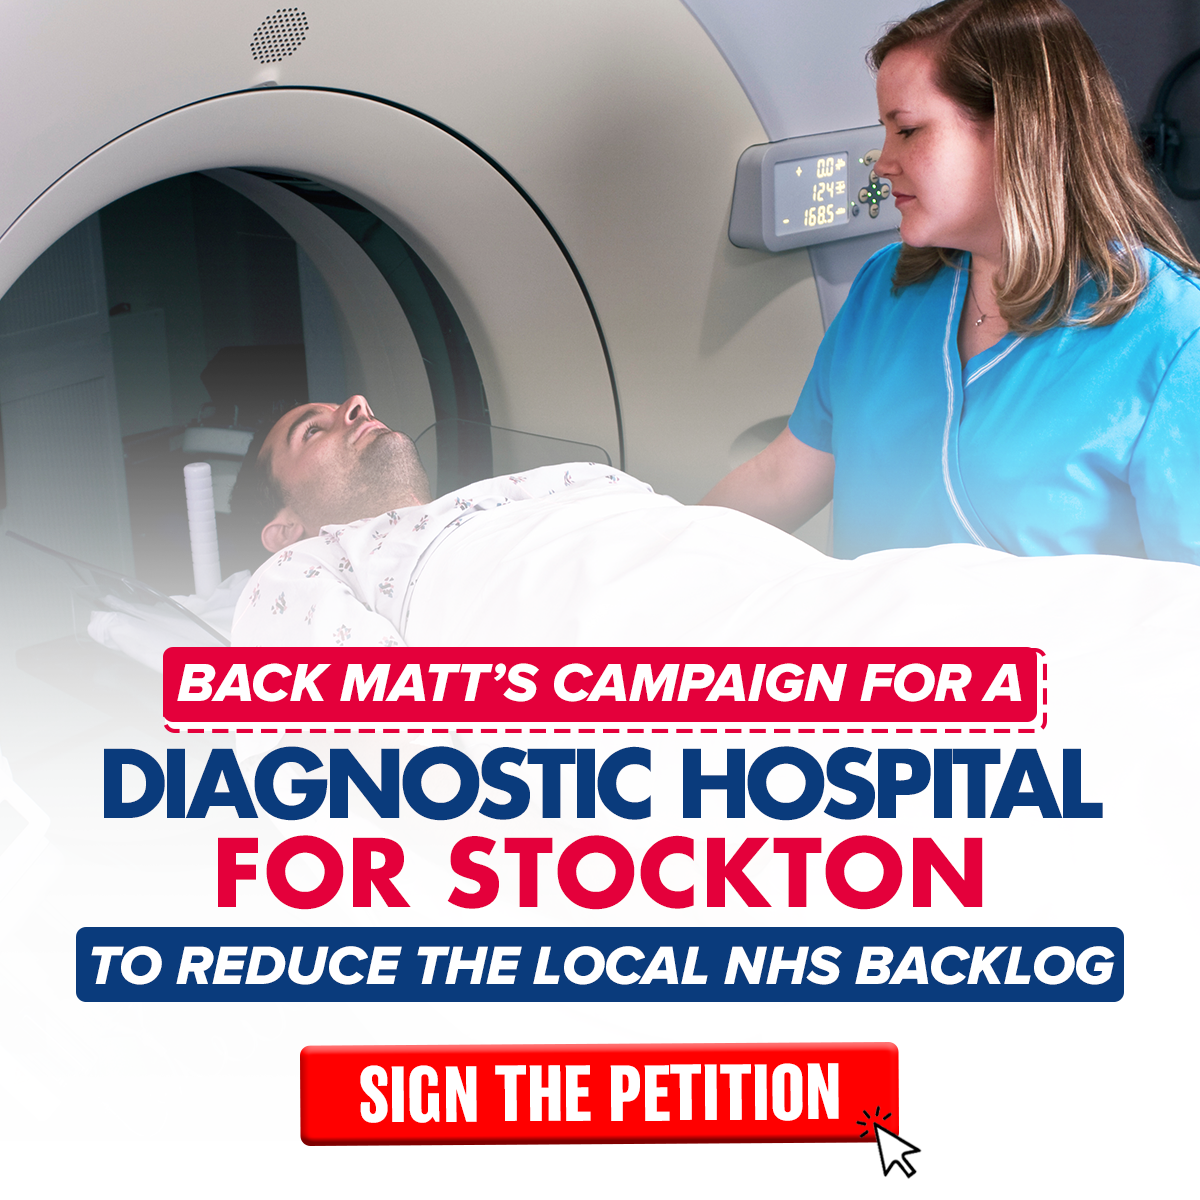 Sign the petition to help Matt reduce the local NHS backlog